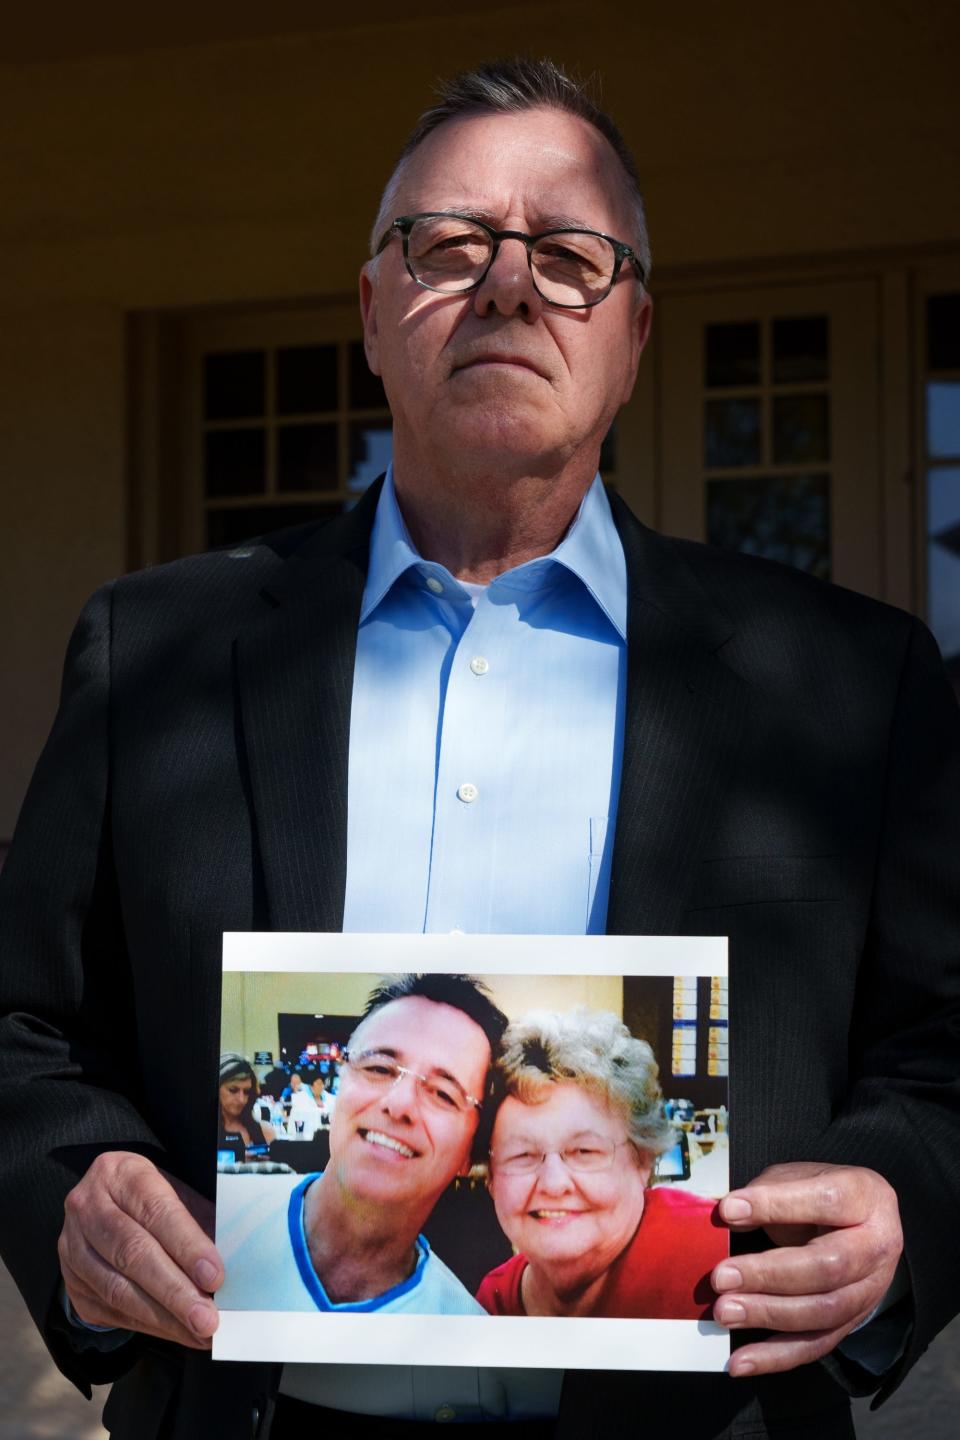 Troy Dinet poses with a photo of him and mother, Joyce Dinet, on March 17, 2023 in Phoenix.